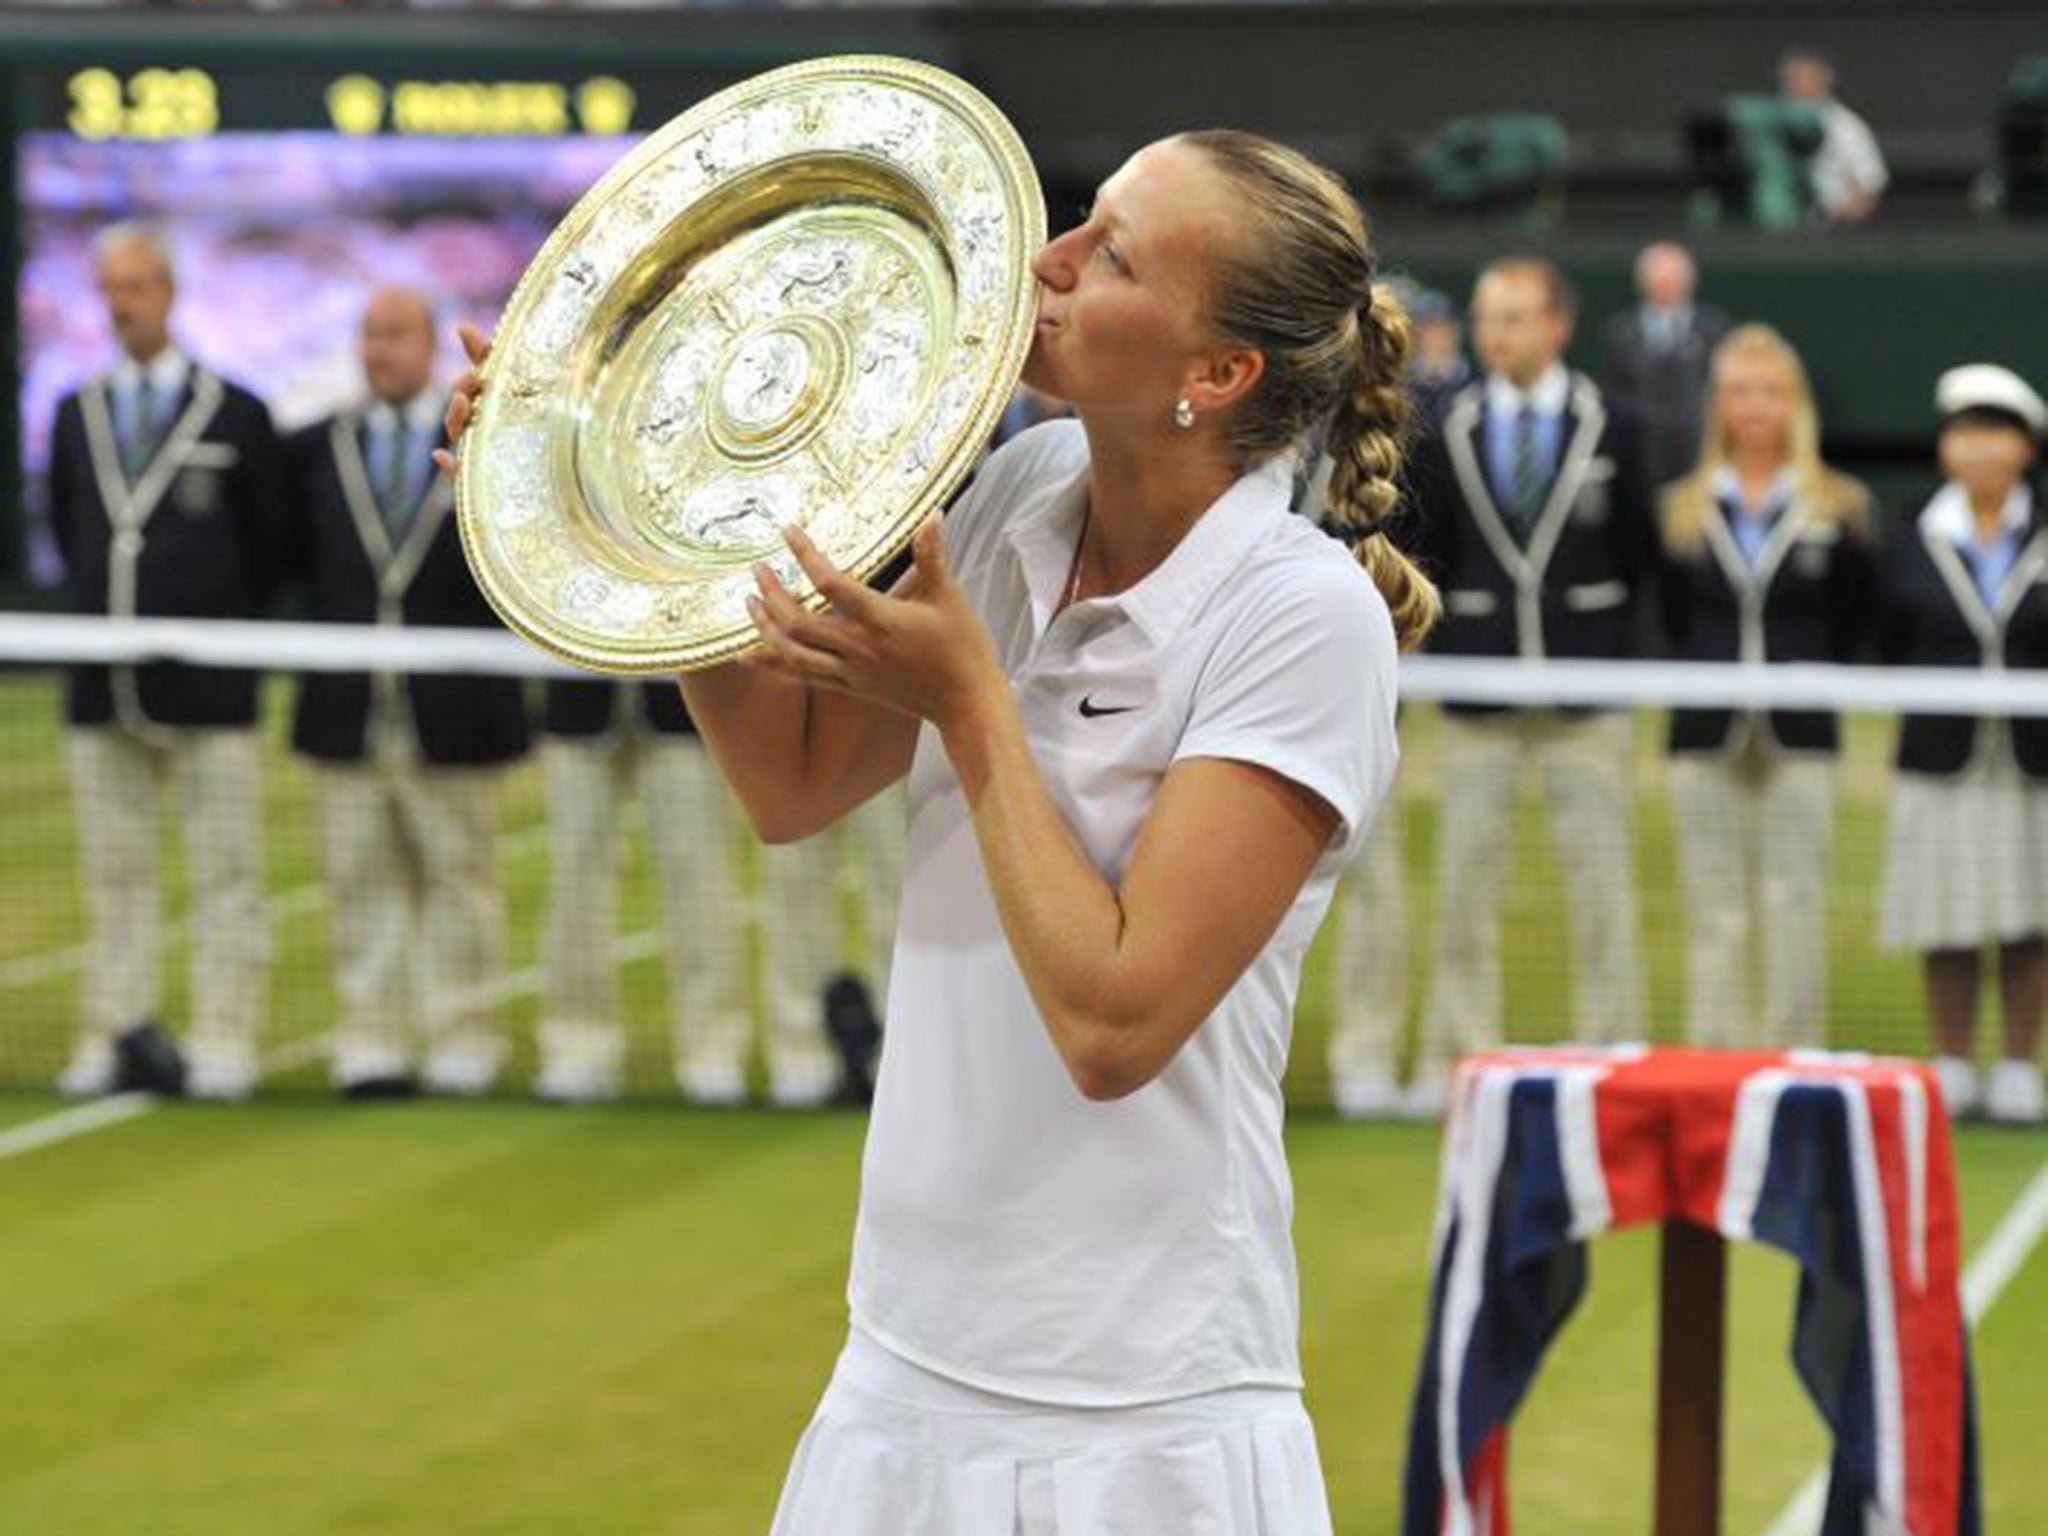 Petra Kvitova shows off the Venus Rosewater Dish after beating Eugenie Bouchard in just 55 minutes in last year’s Wimbledon final